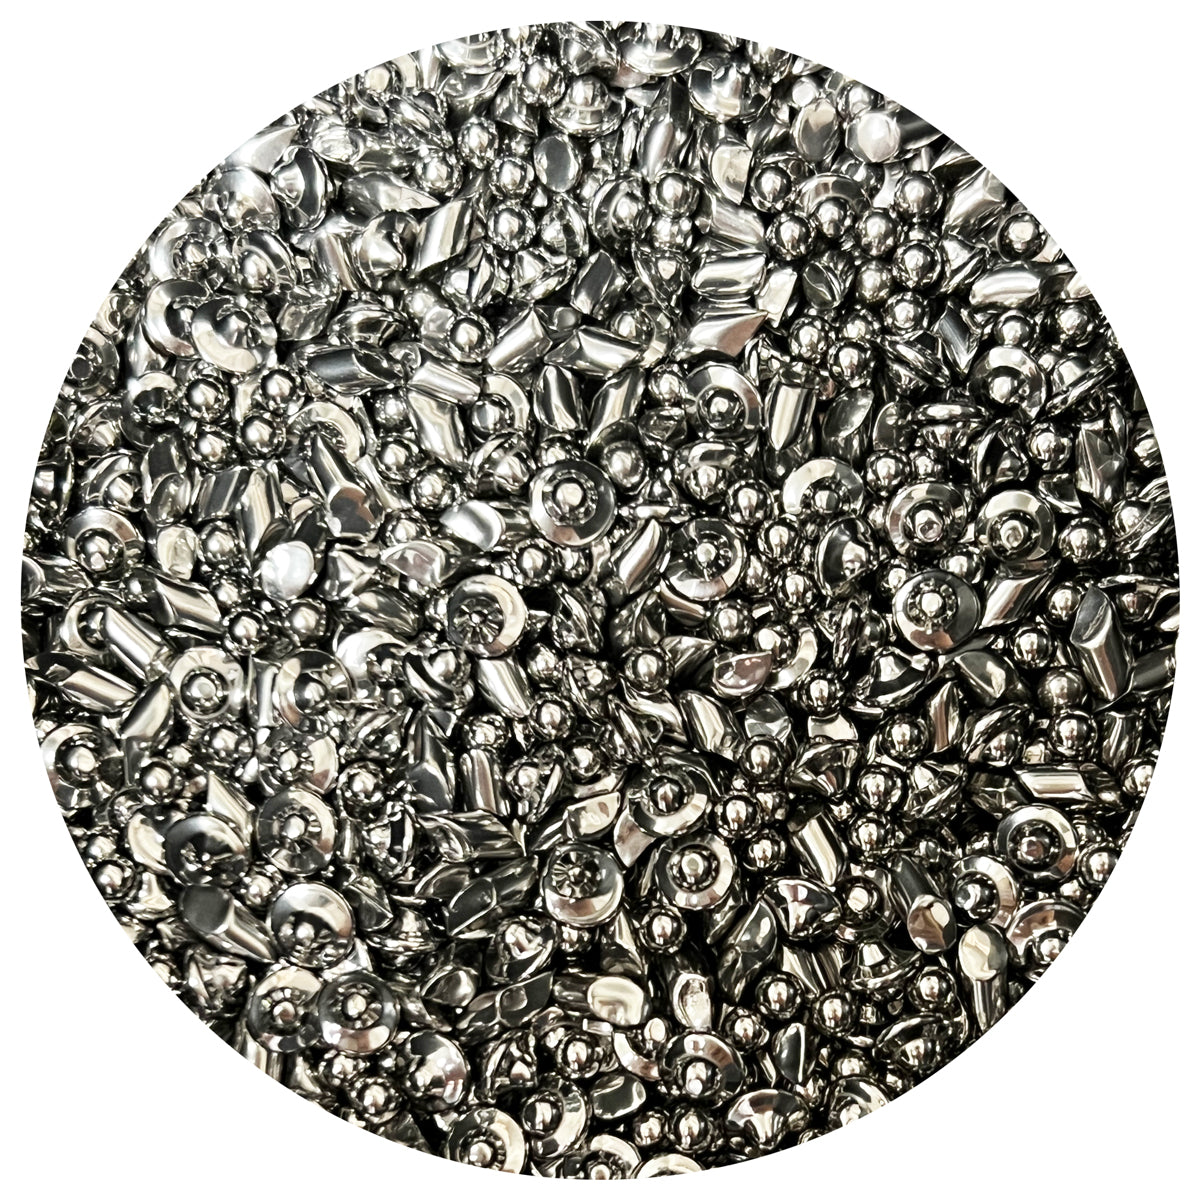 Stainless Steel Shot (304) for Tumbling, No Pins, 2 Pound Bag – Beaducation